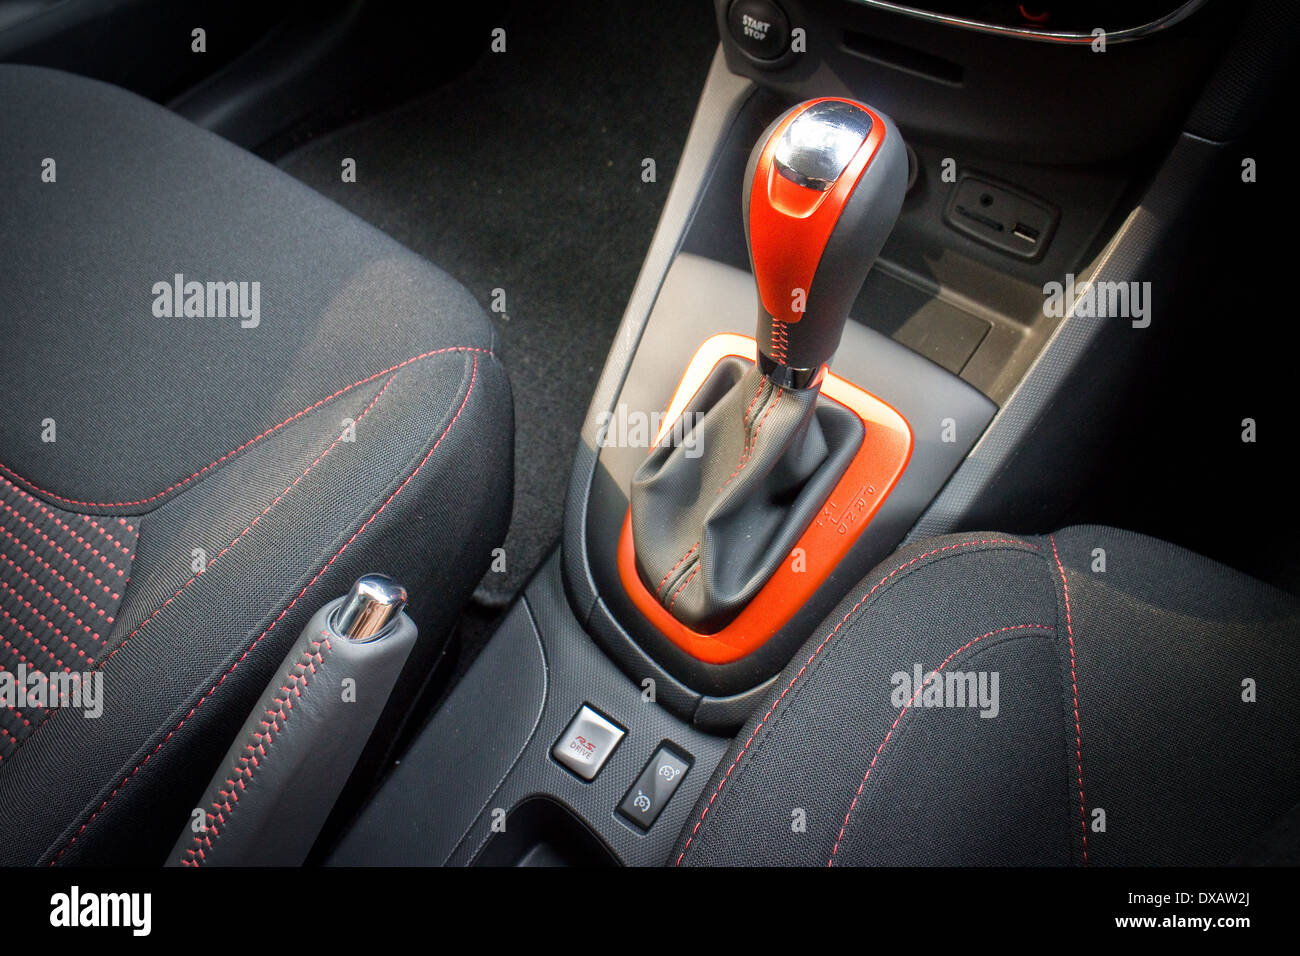 Renault Clio RS Cup cambio marcia stick Foto stock - Alamy